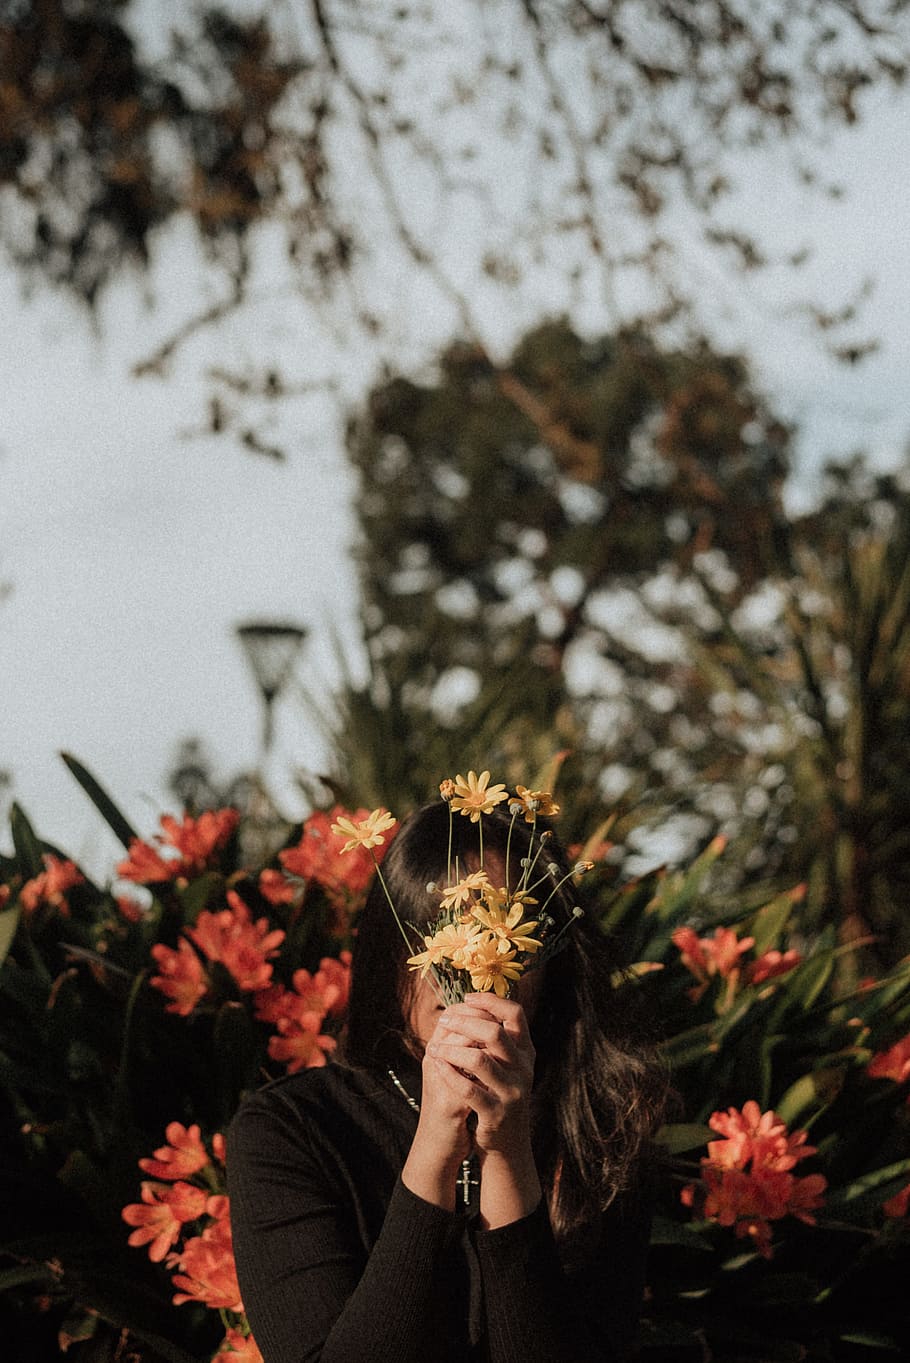 Hd Wallpaper Woman Hiding Her Face With Yellow Flowers During Daytime Plant Wallpaper Flare